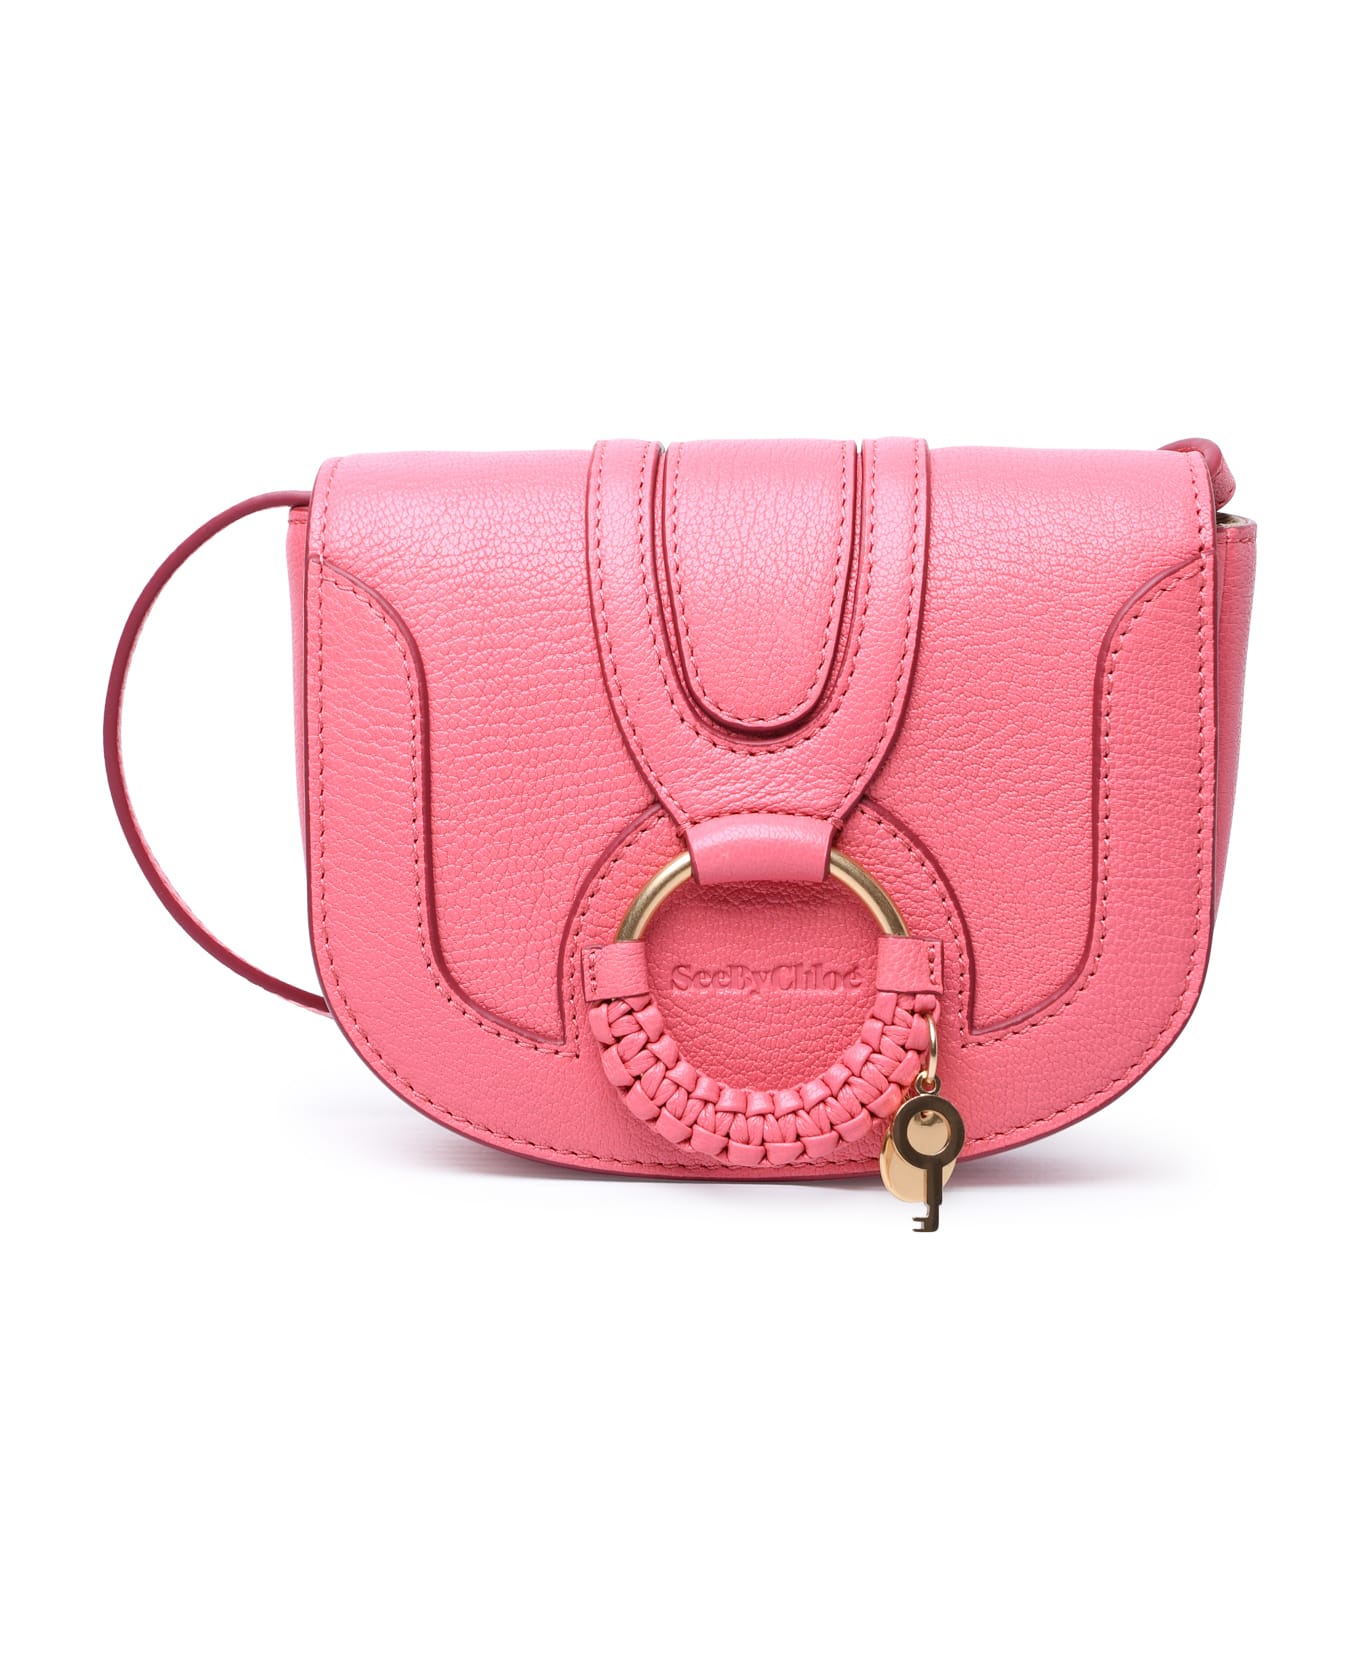 See by Chloé 'hana' Pink Small Leather Bag - Pink トートバッグ